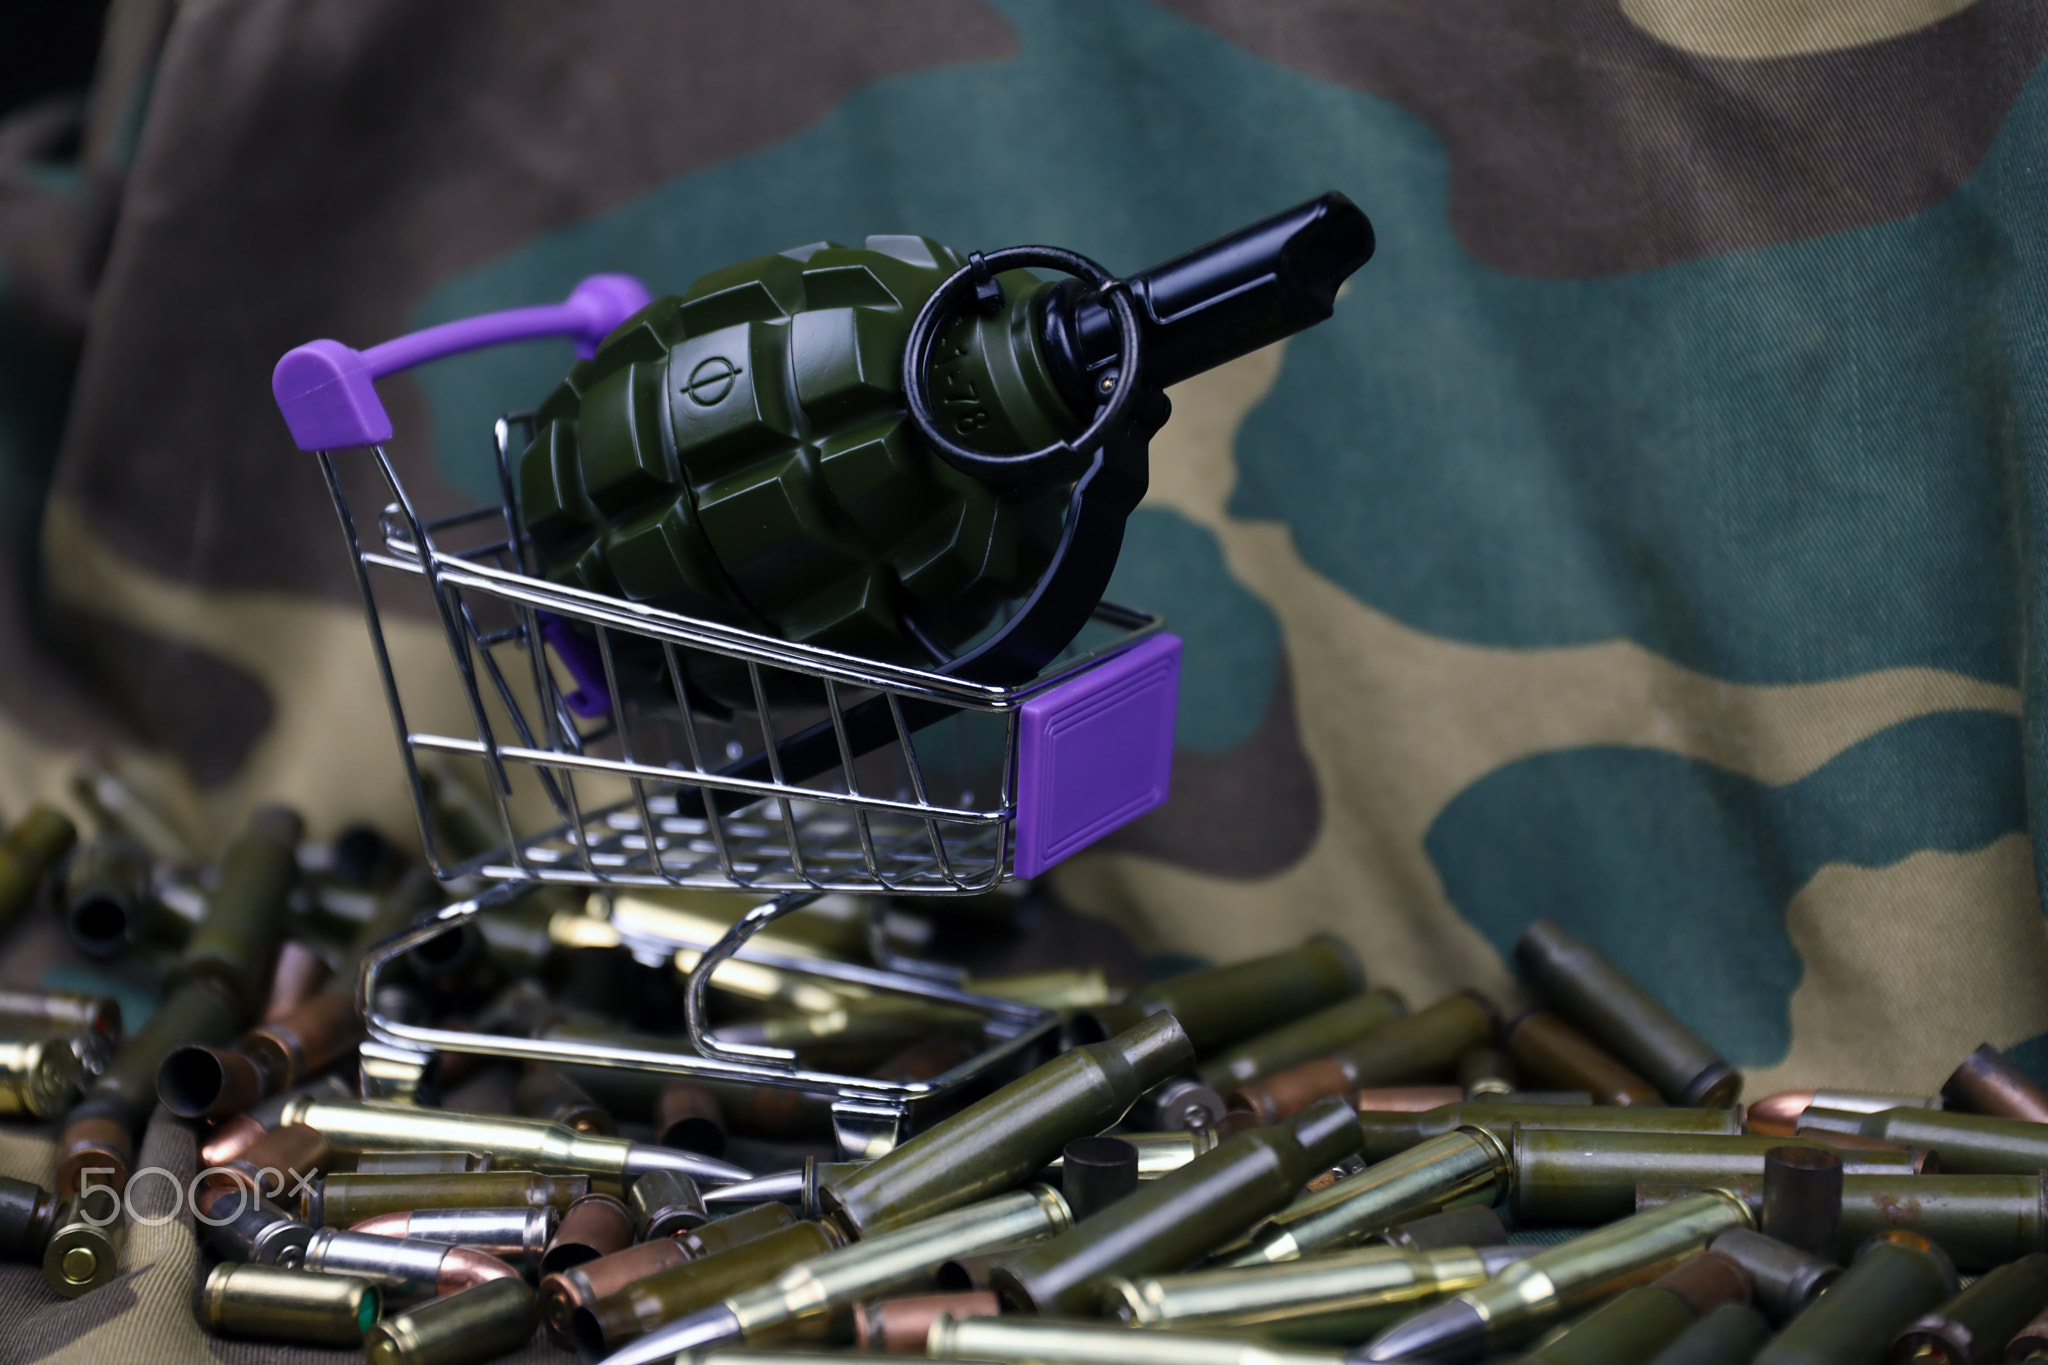 Rifle cartridges in small shopping cart. Big caliber ammo cartridges and hand grenades with a small